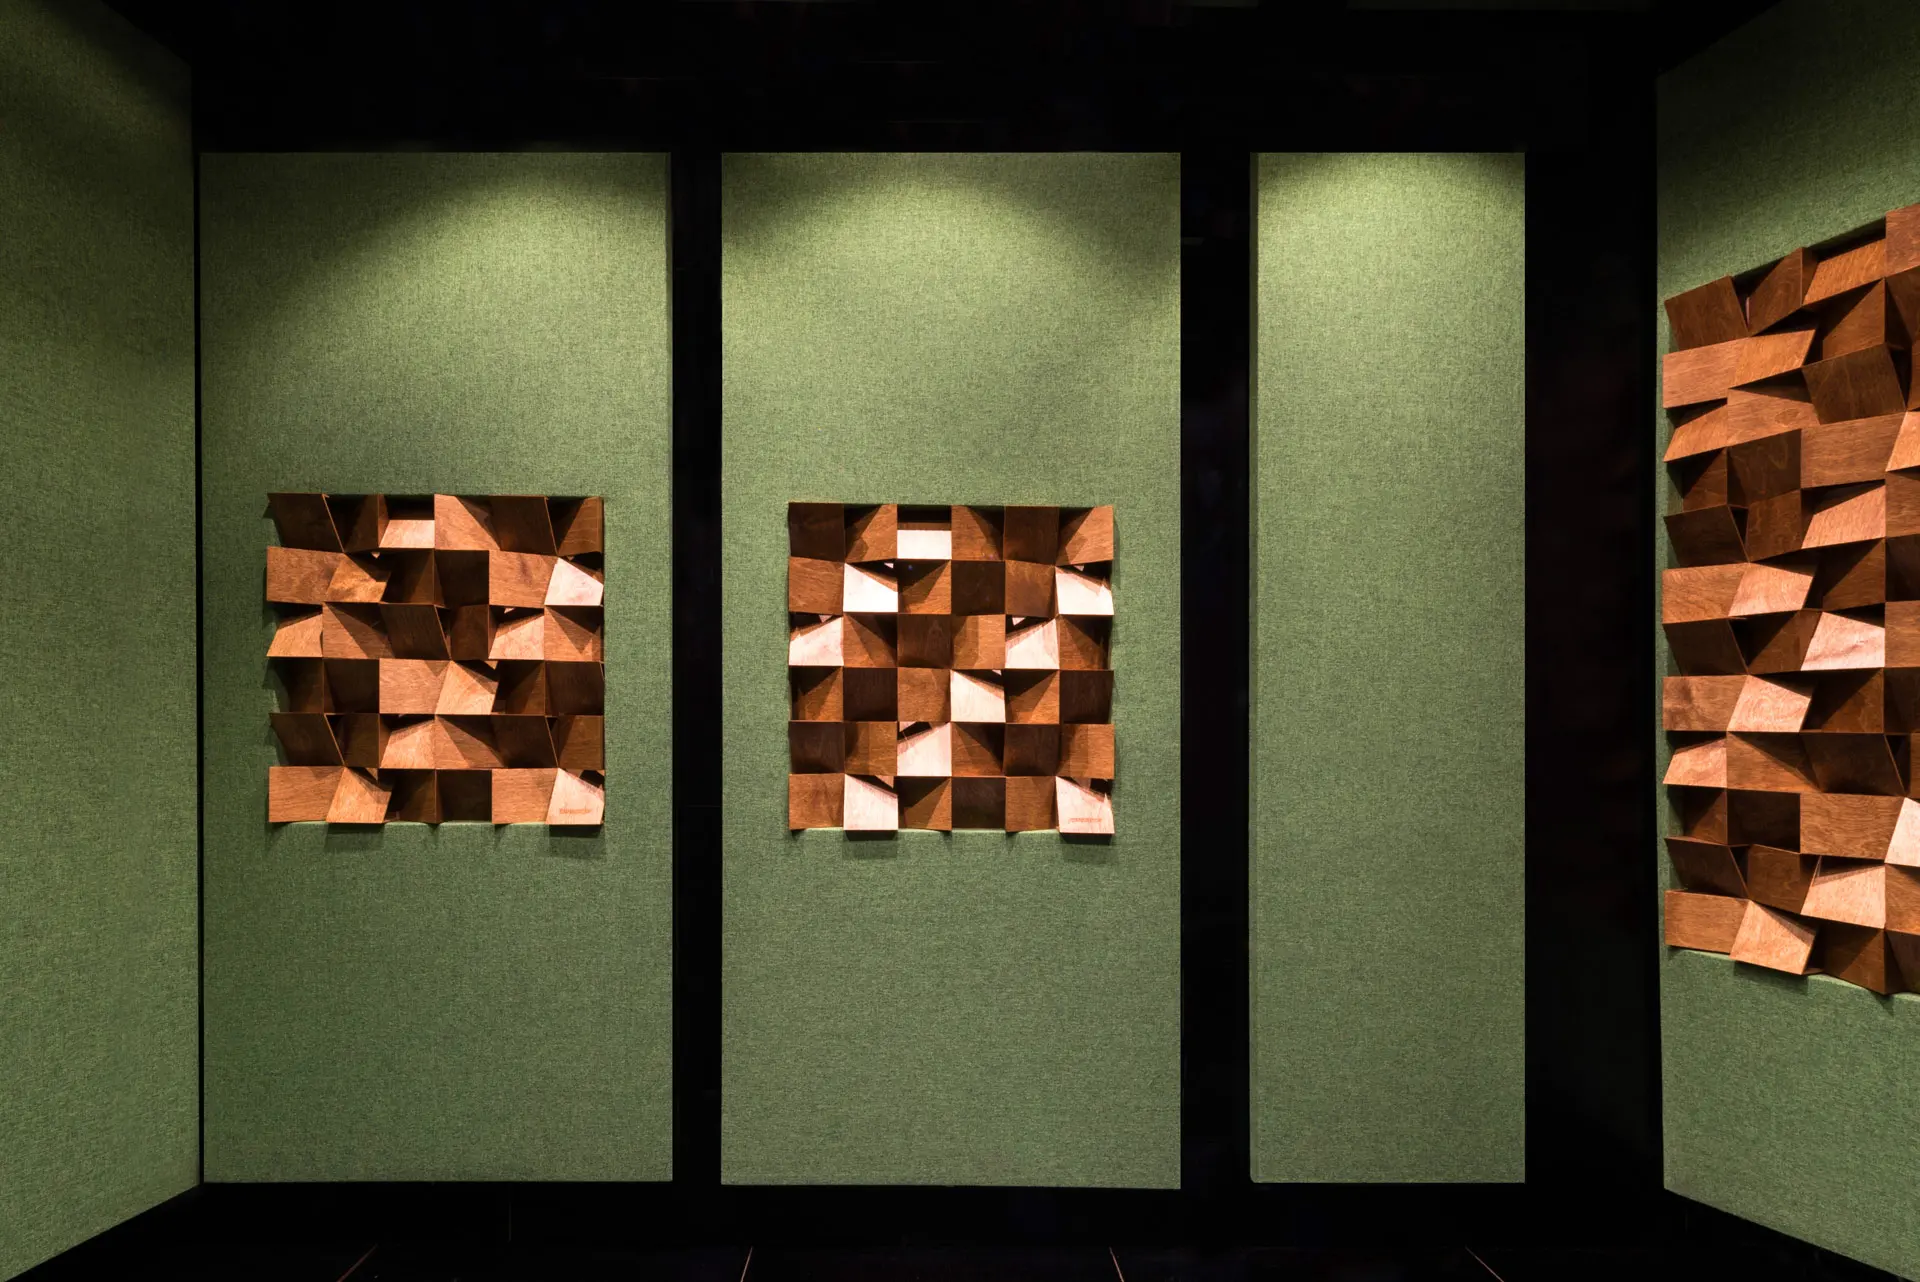 Broadband sound absorber Diffuser panel in Vocal recording  mixing studio room